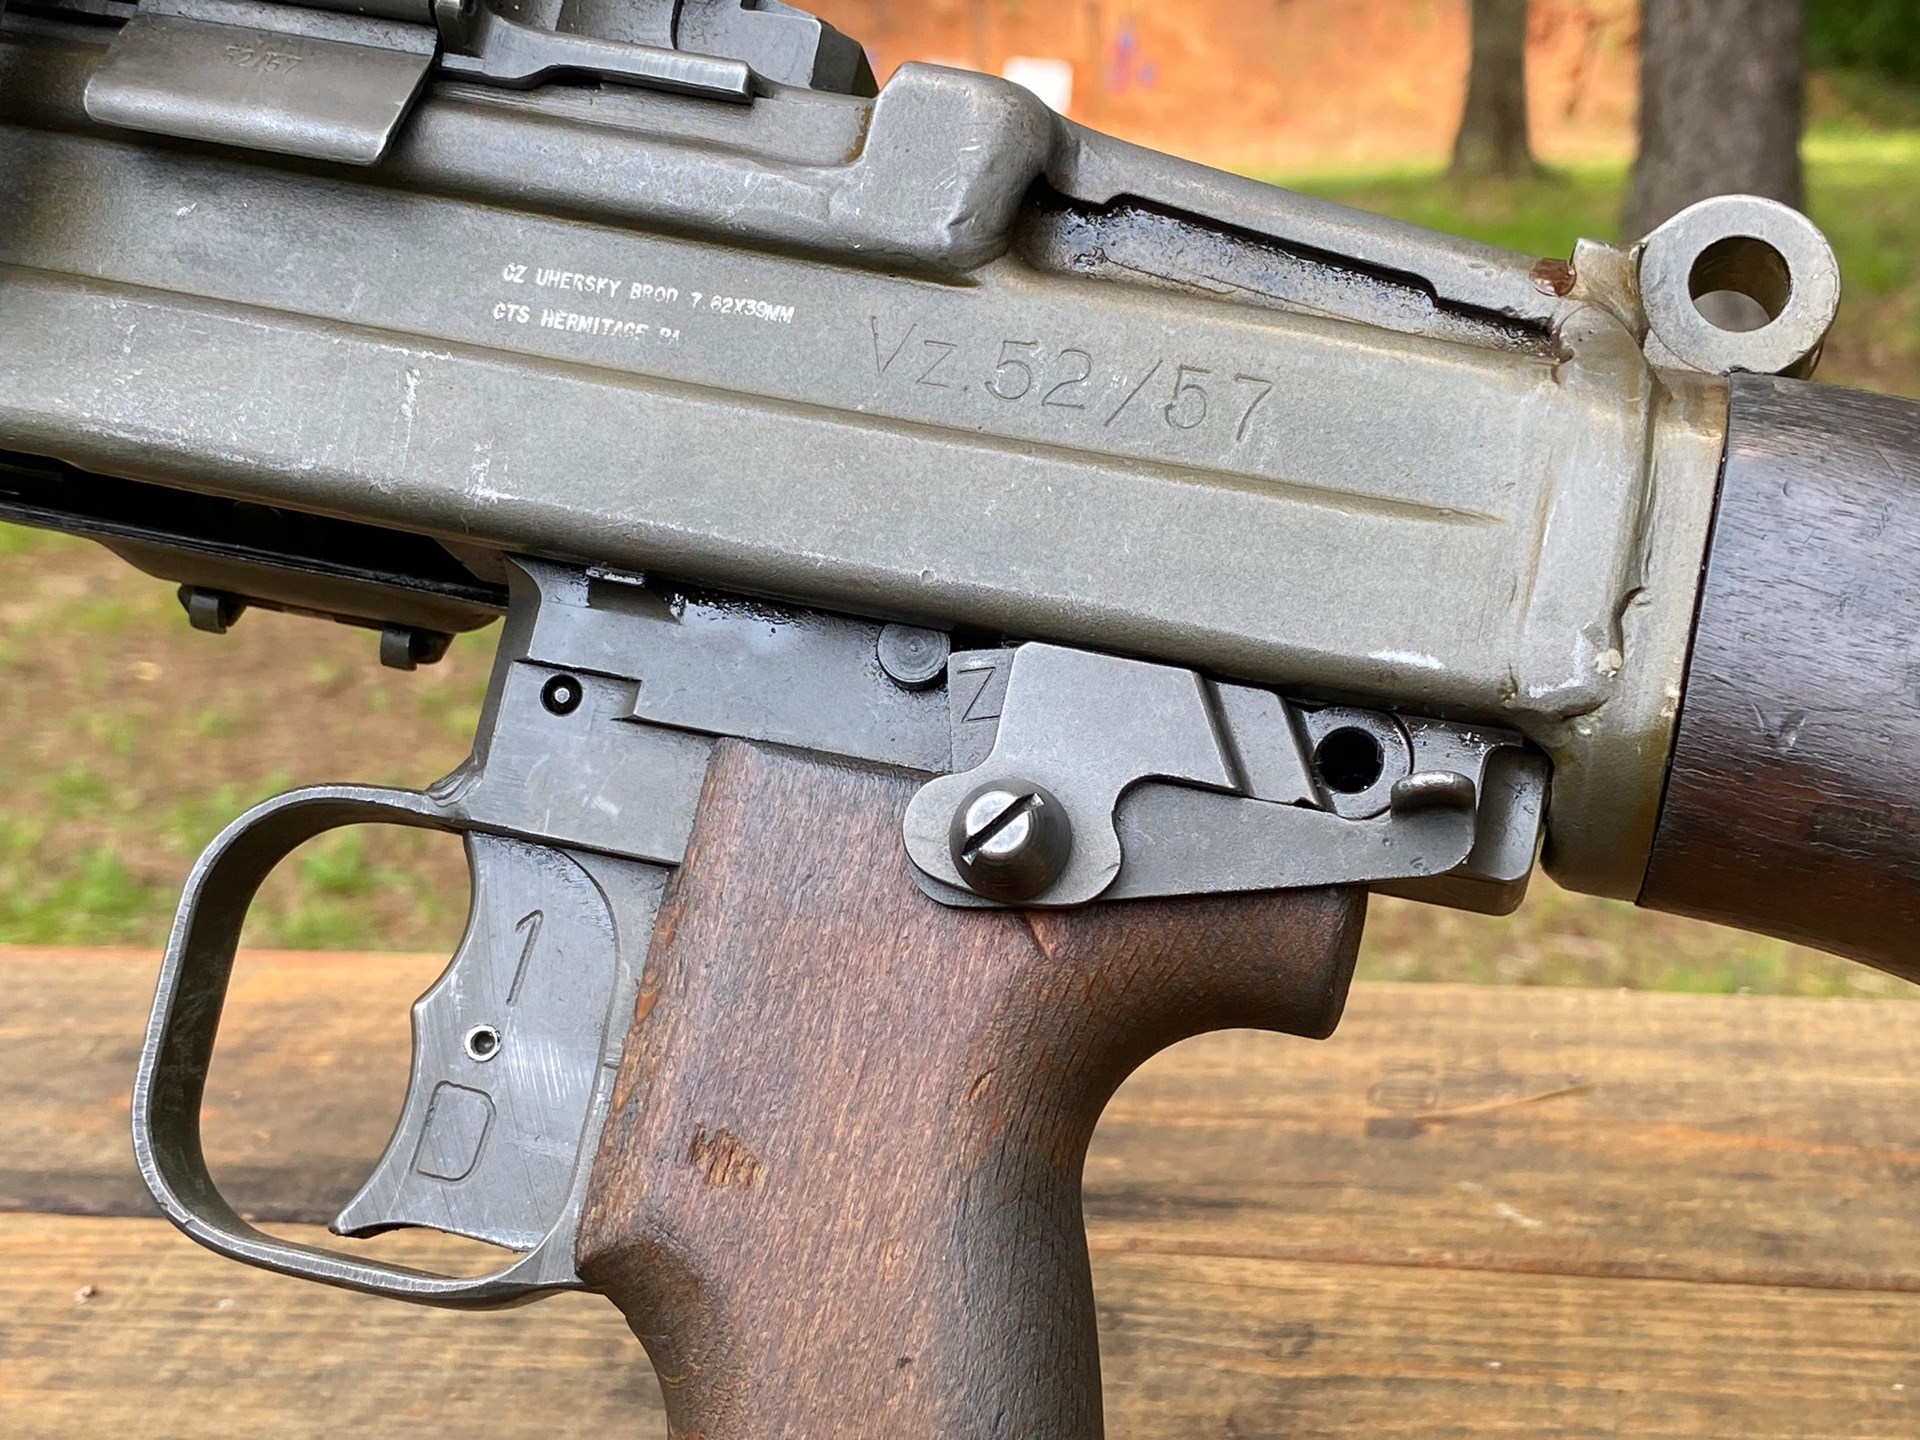 Close-up of the left side of the receiver of a Post-86 Dealer Sample vz. 52/57 light machine gun in 7.62×39 mm showing its MG34 type double-trigger and the release lever/safety that allows the pistol grip to function as the cocking handle. Image courtesy of Martin K.A. Morgan.